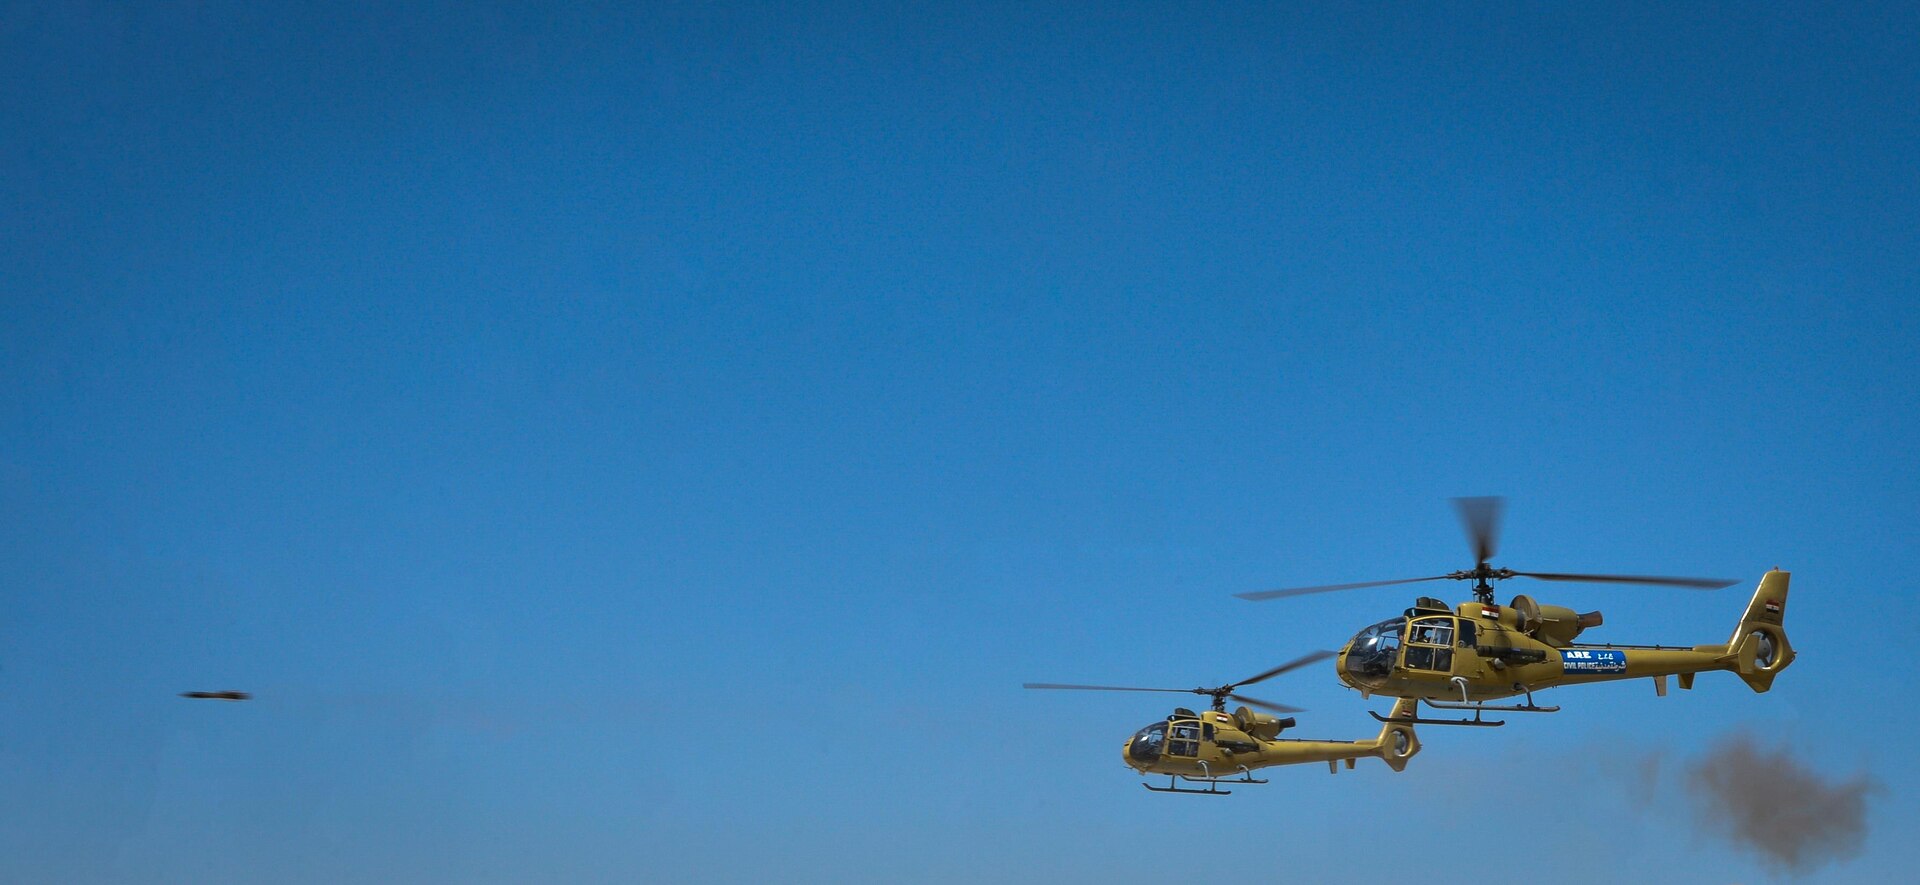 Two Egyptian Aérospatiale Gazelle helicopters participate in a combined arms live fire exercise during Bright Star 2017, Sept. 20, 2017, at Mohamed Naguib Military Base, Egypt. More than 200 U.S. service members are participating alongside the Egyptian armed forces for the bilateral U.S. Central Command Exercise Bright Star 2017, Sept. 10 – 20, 2017. (U.S. Air Force photo by Staff Sgt. Michael Battles)